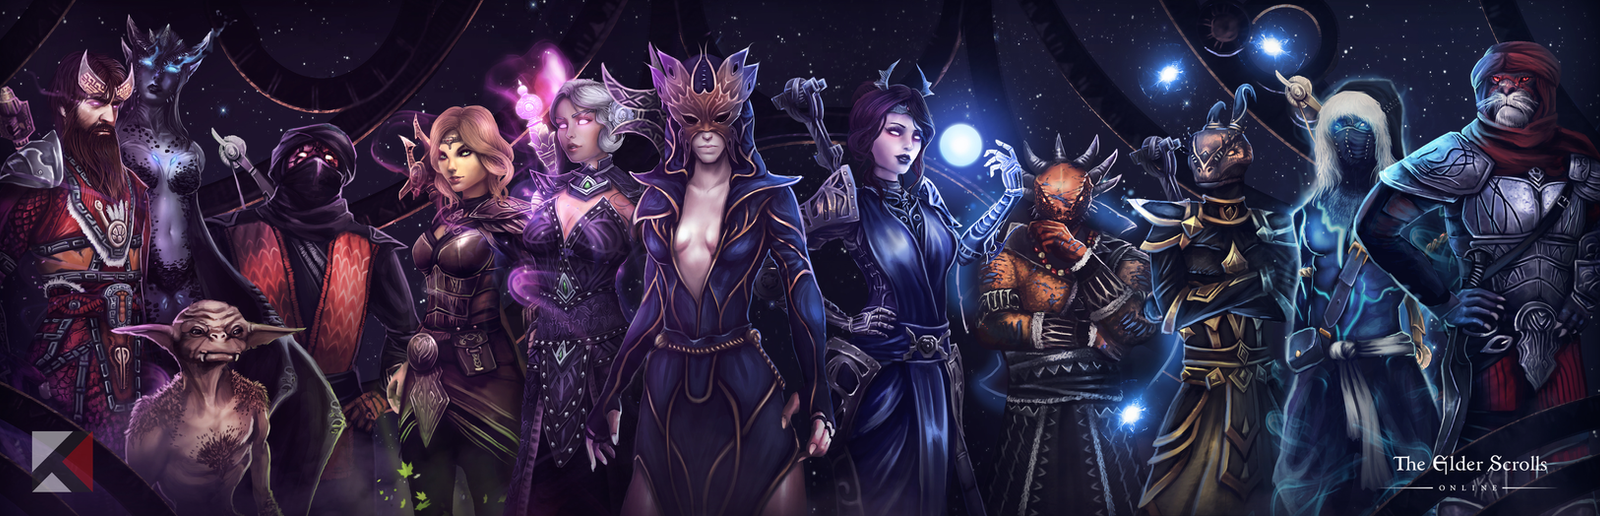 victorious_secret__conquerers_of_tamriel_by_kaizerchang-dc2f9g6.png